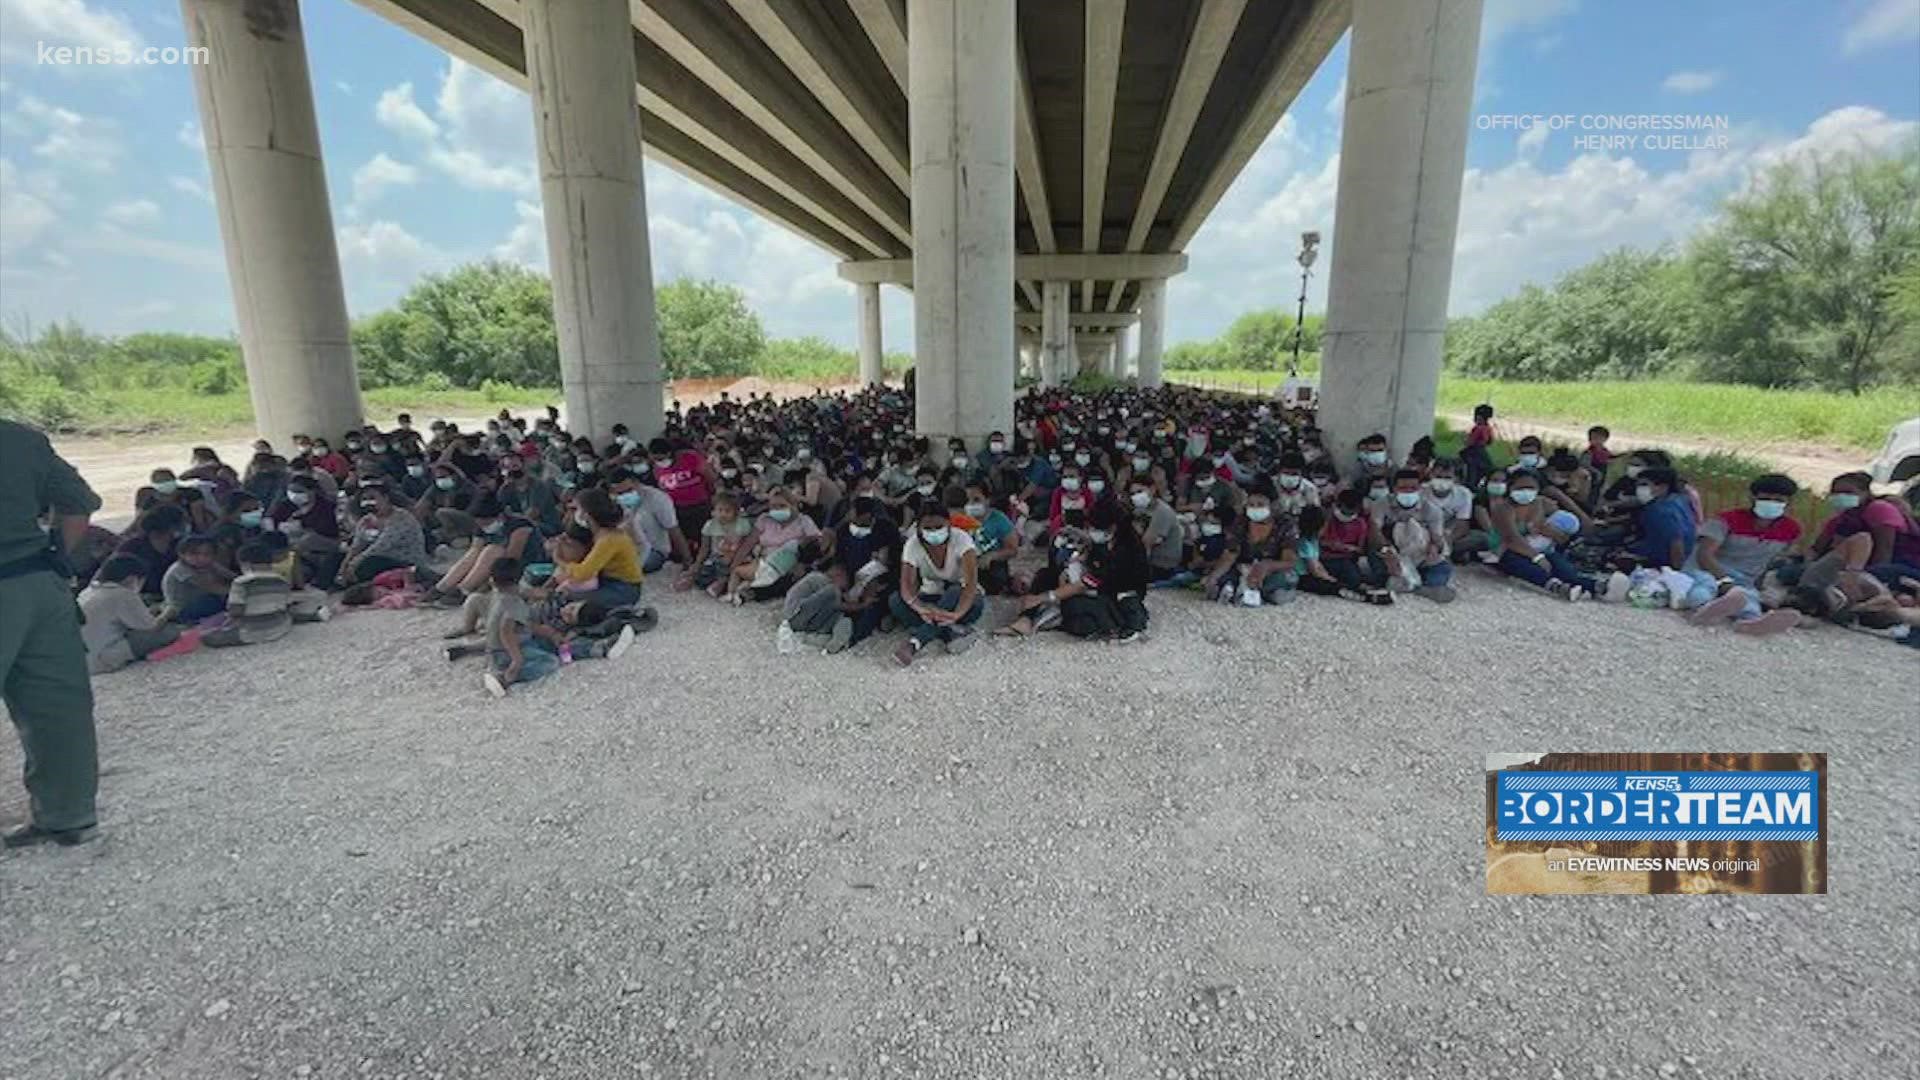 U.S. Border Patrol officials claim the facility is an initial processing site where families are held for only a few hours.